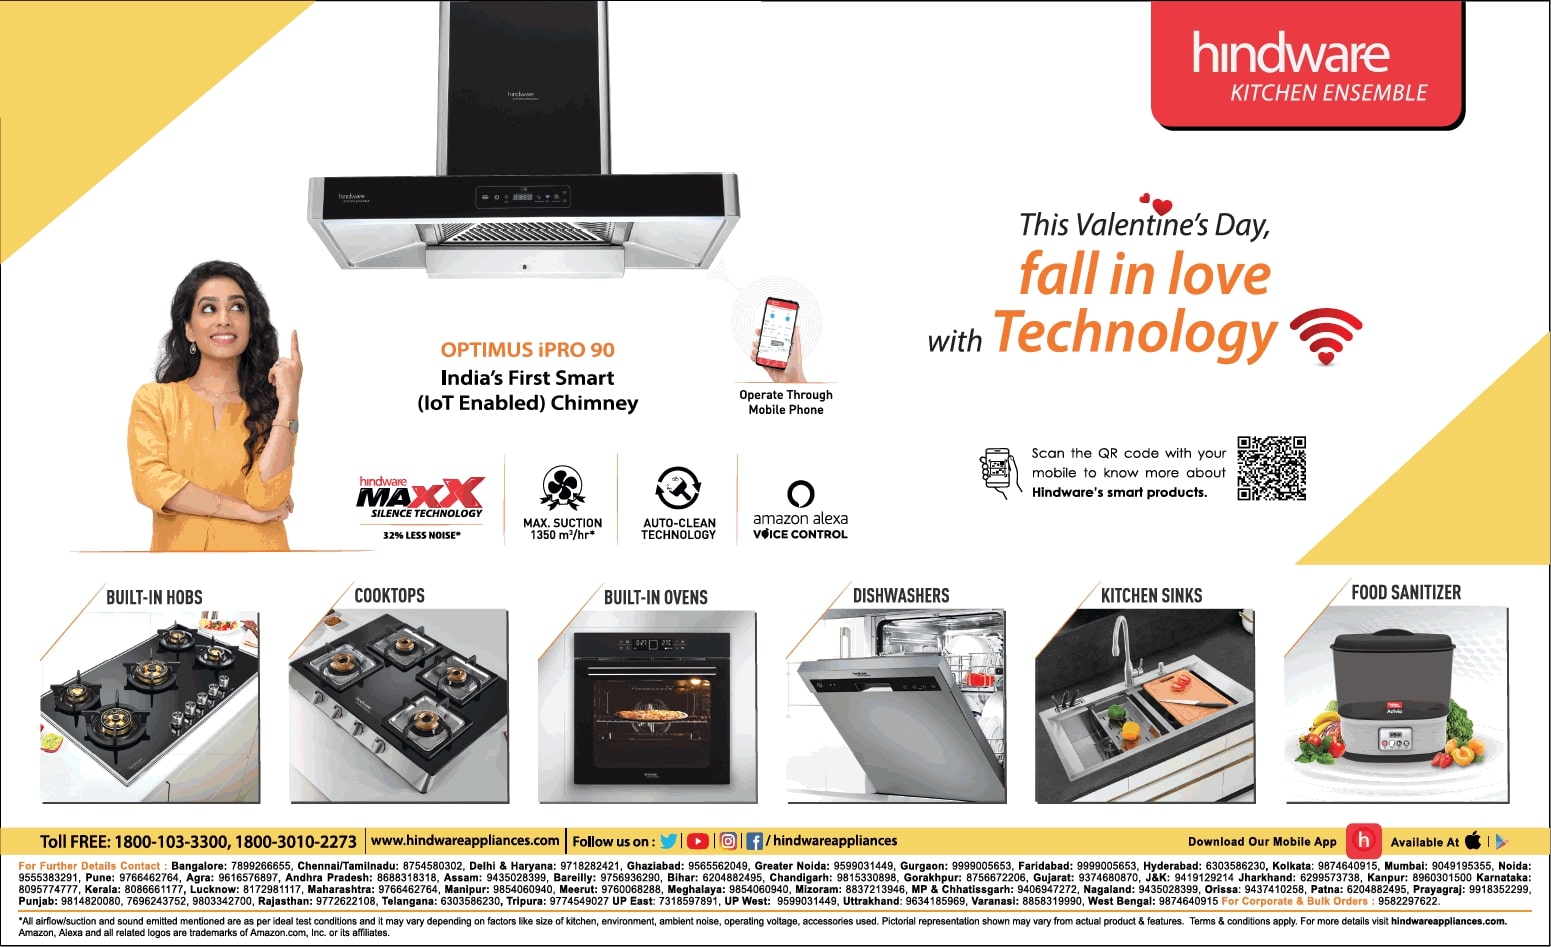 hindware-kitchen-ensemble-this-valentines-day-fall-in-love-with-technology-ad-bombay-times-12-02-2021